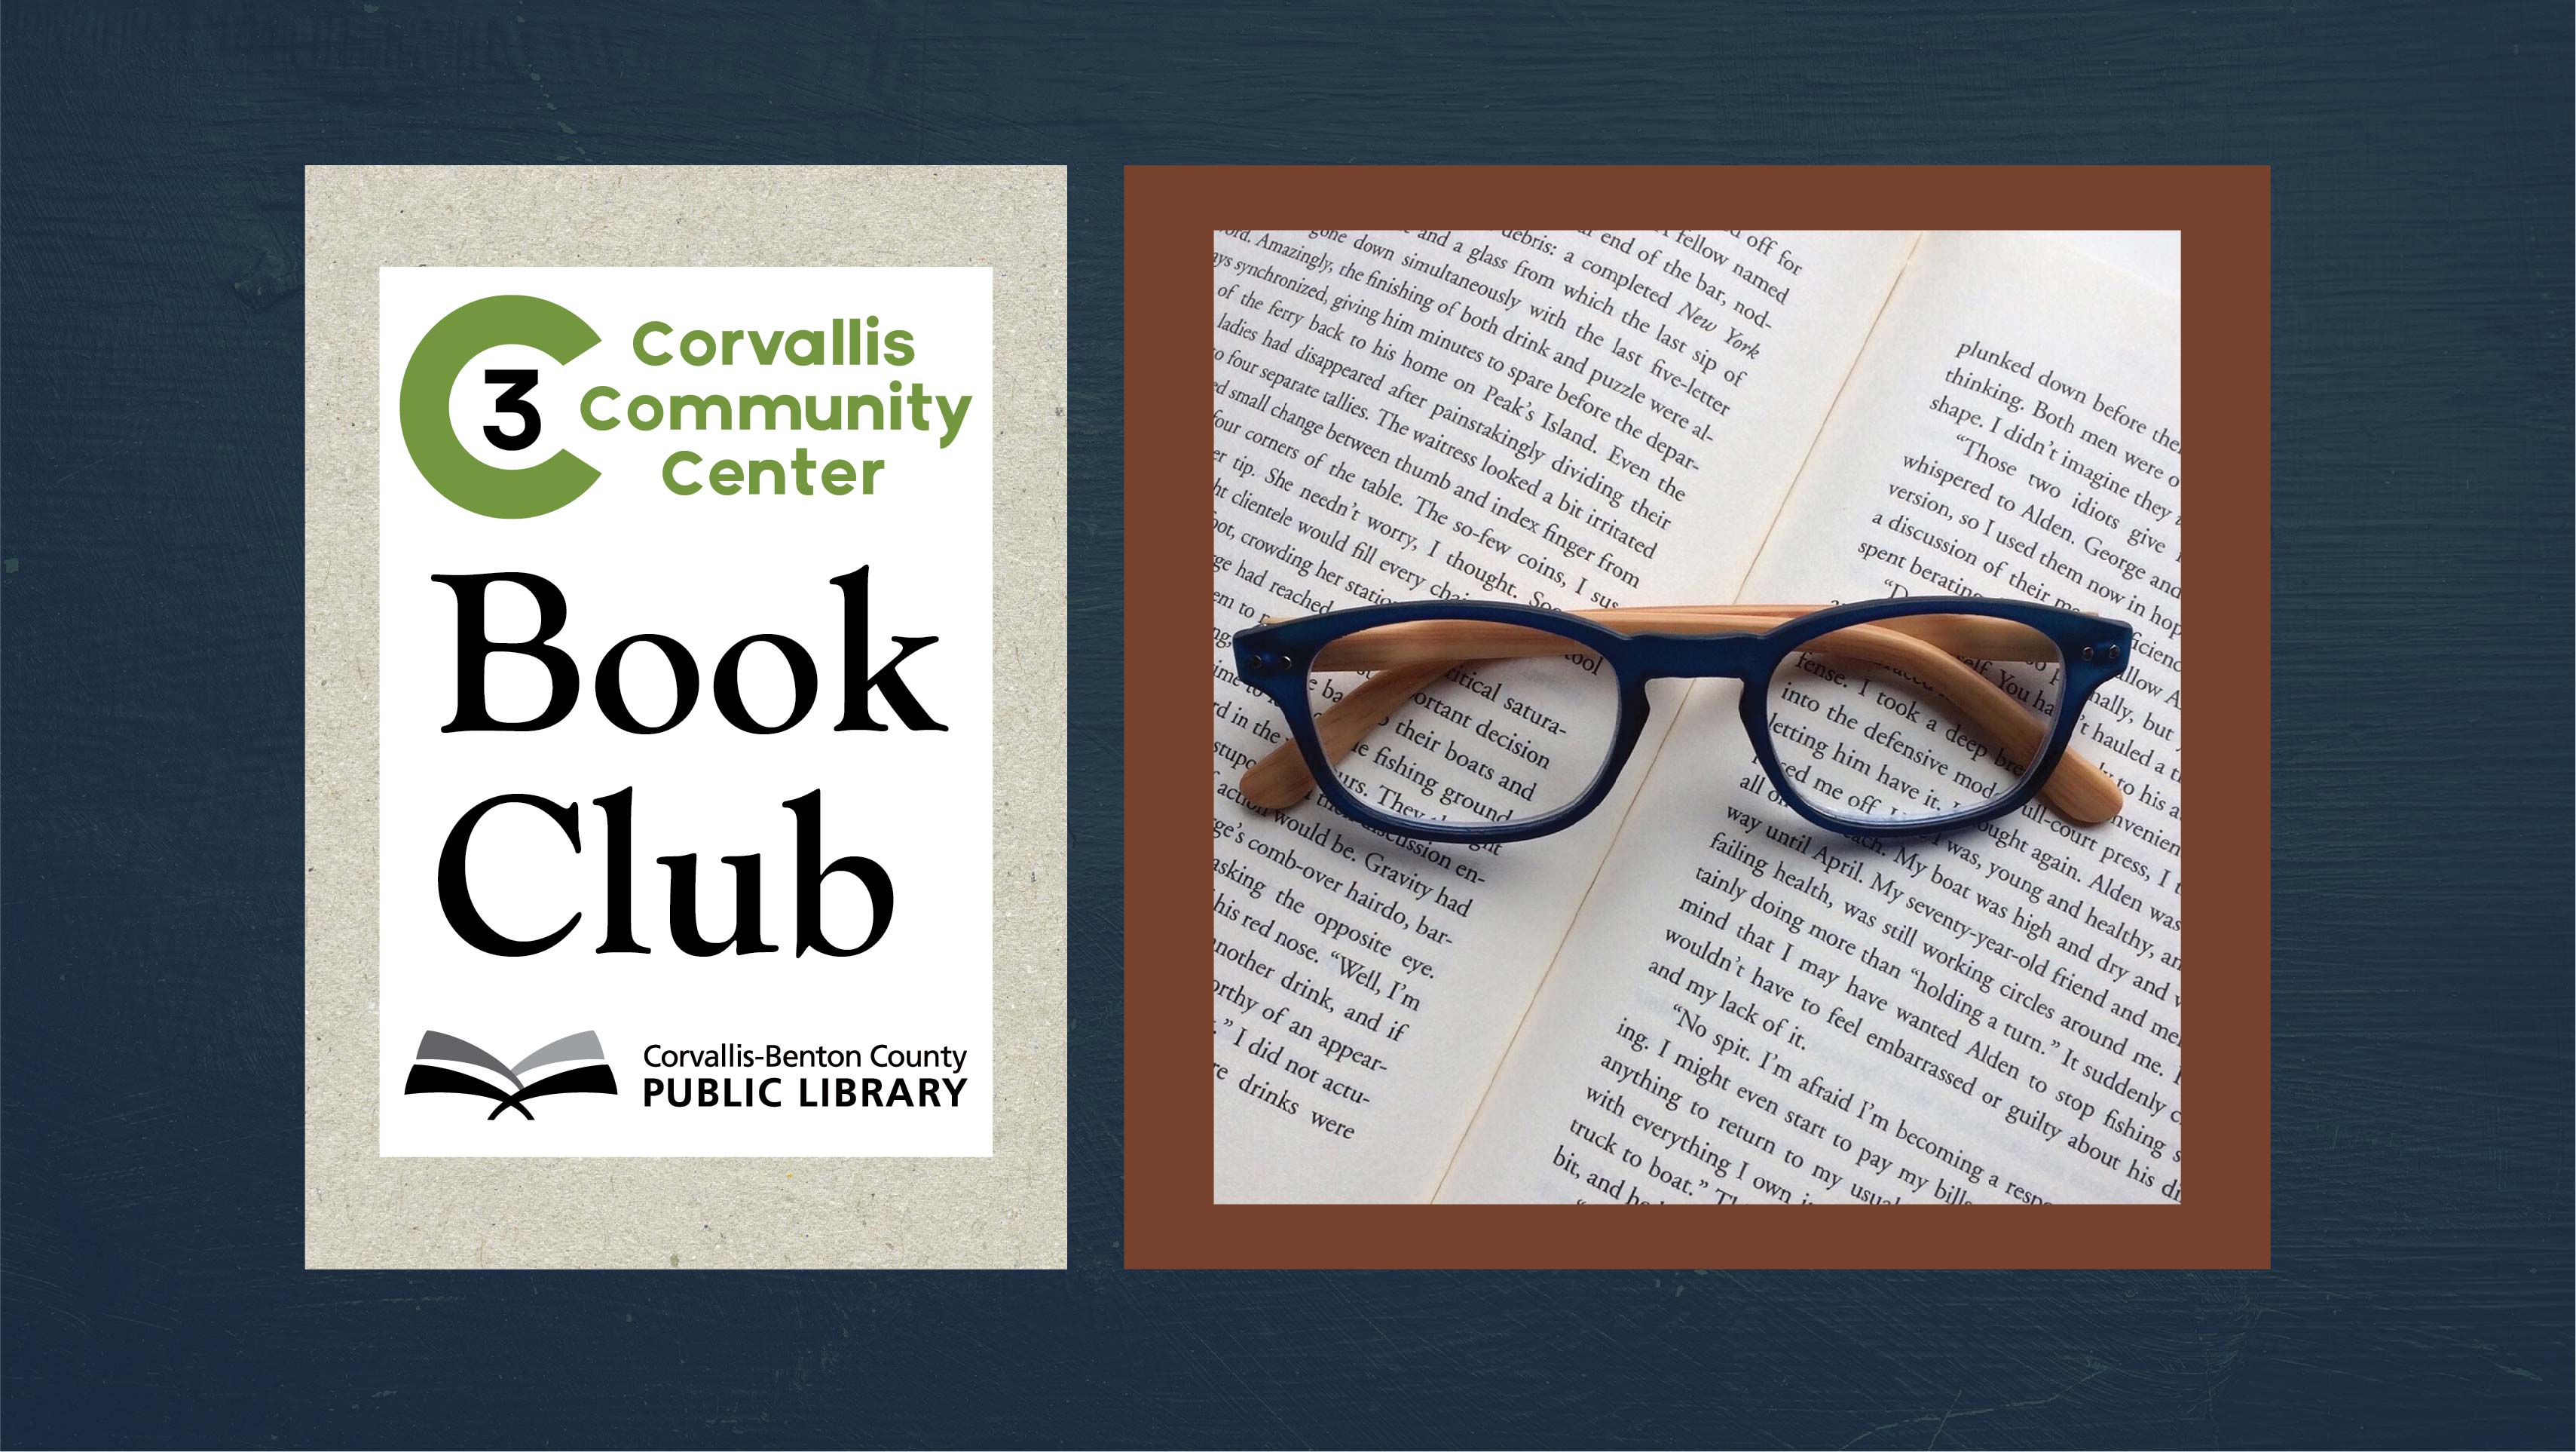 Corvallis Community Center (C3) Book Club with photo of eyeglasses and a book page